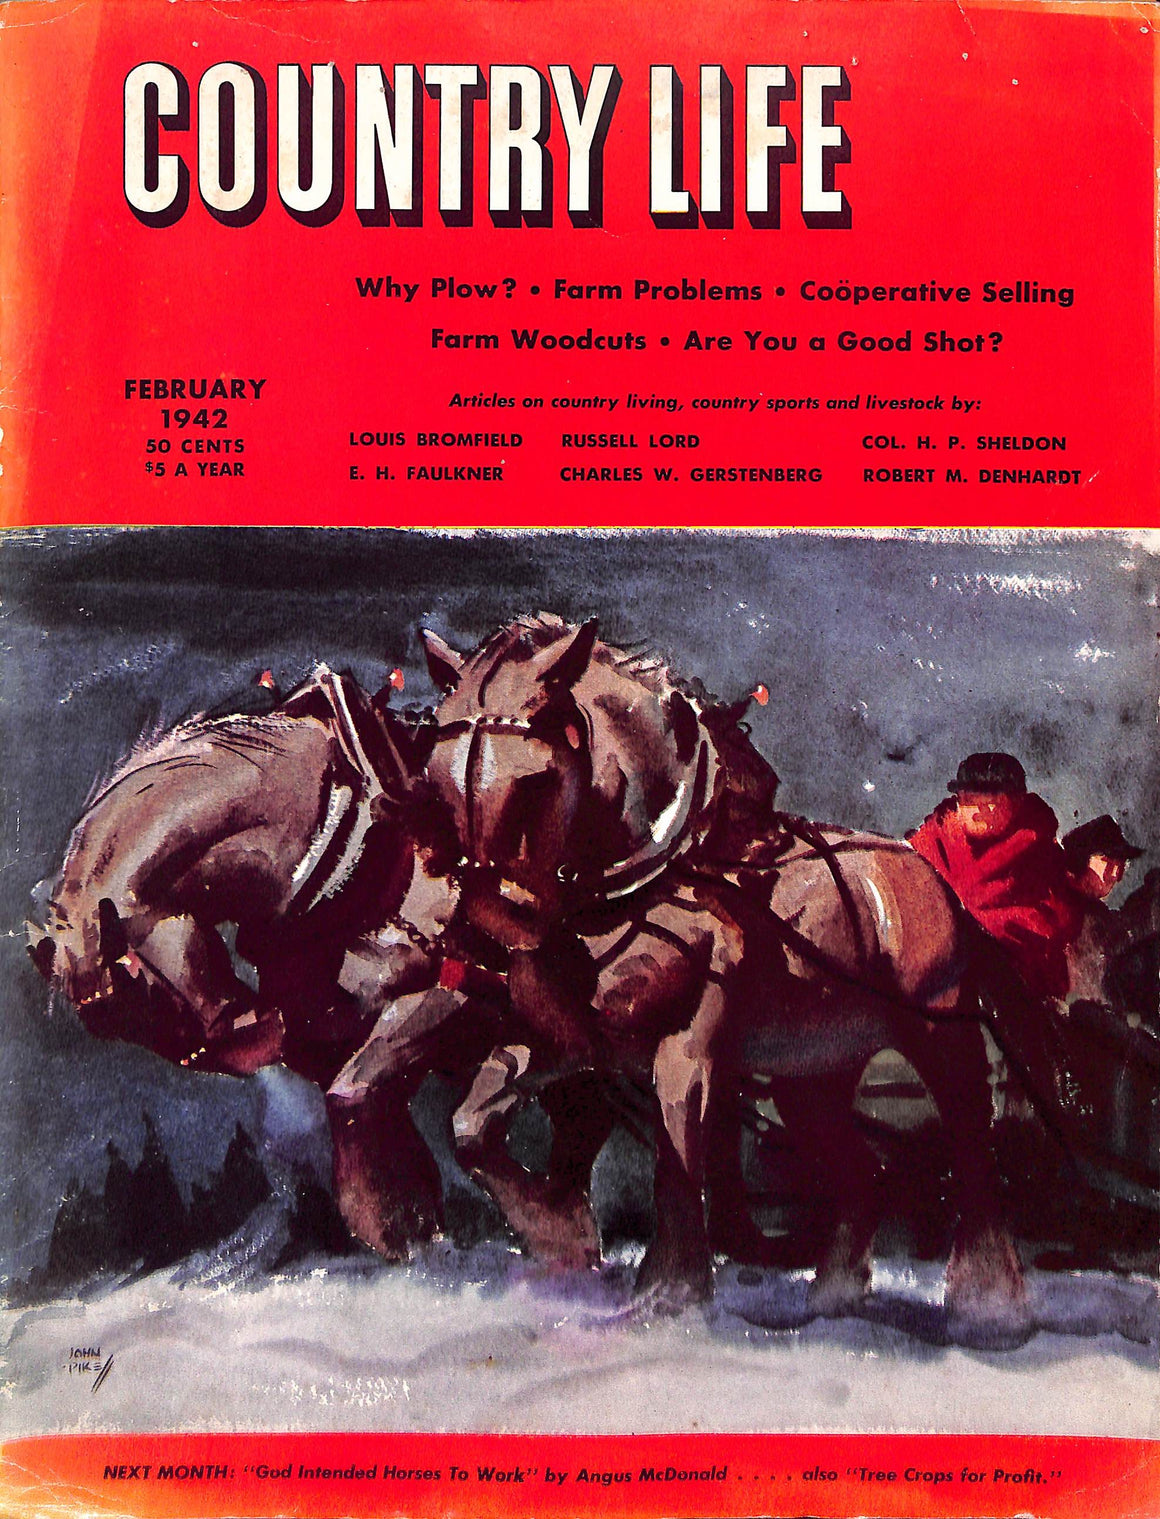 "Country Life: February 1942"